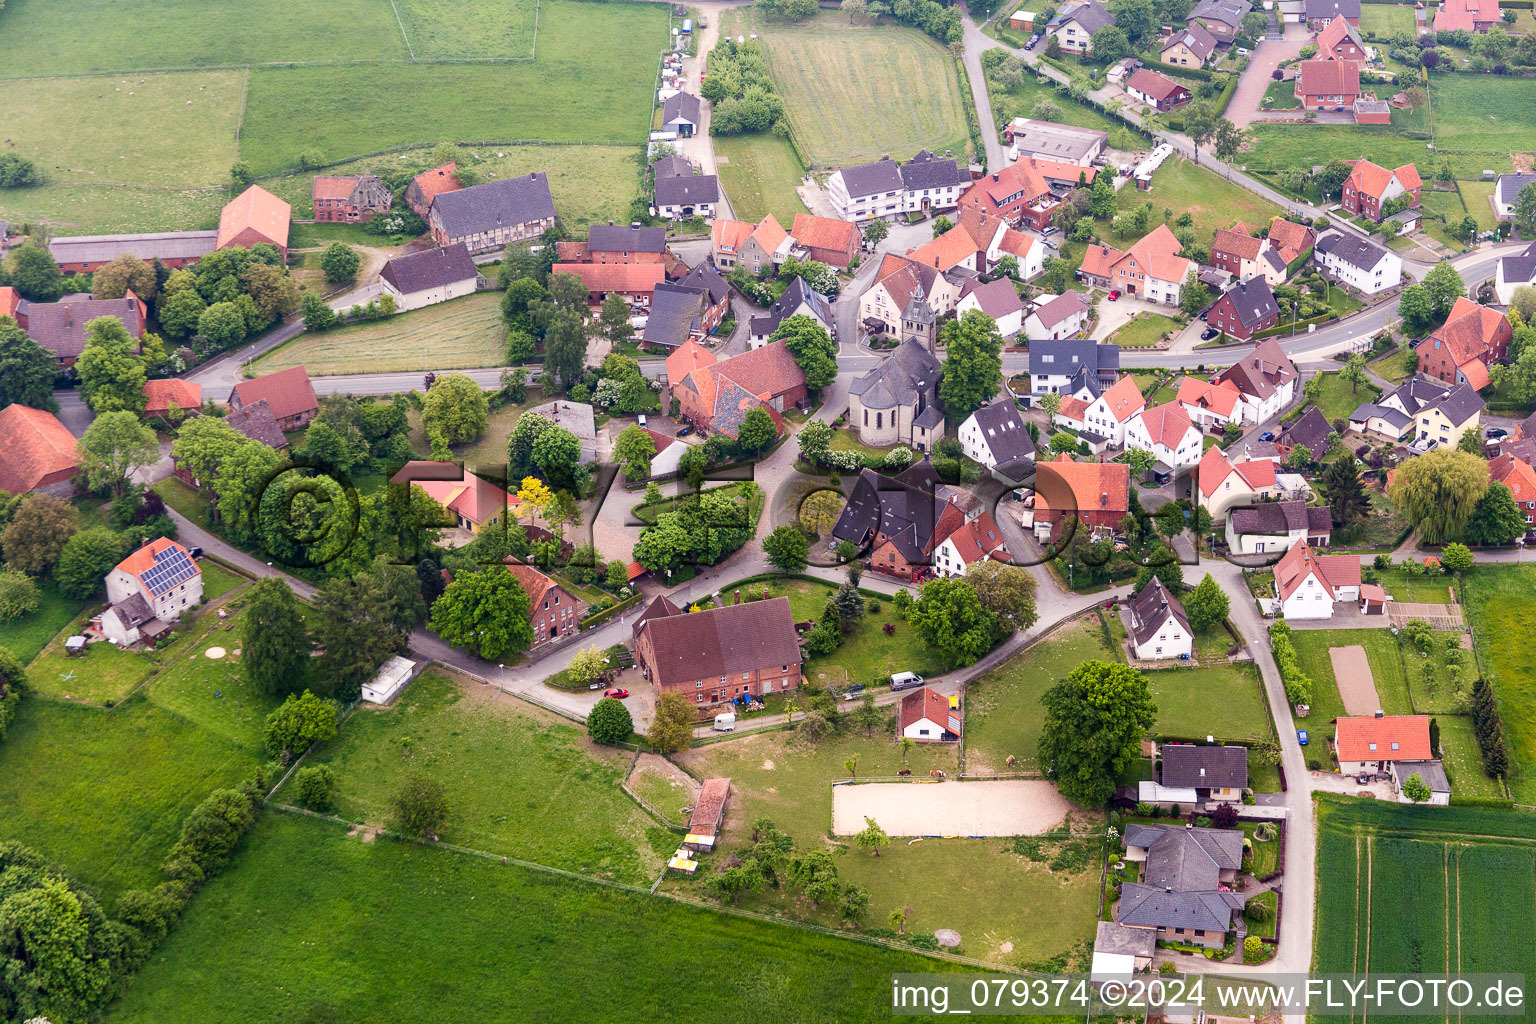 Village - view on the edge of agricultural fields and farmland in the district Rolfzen in Steinheim in the state North Rhine-Westphalia, Germany